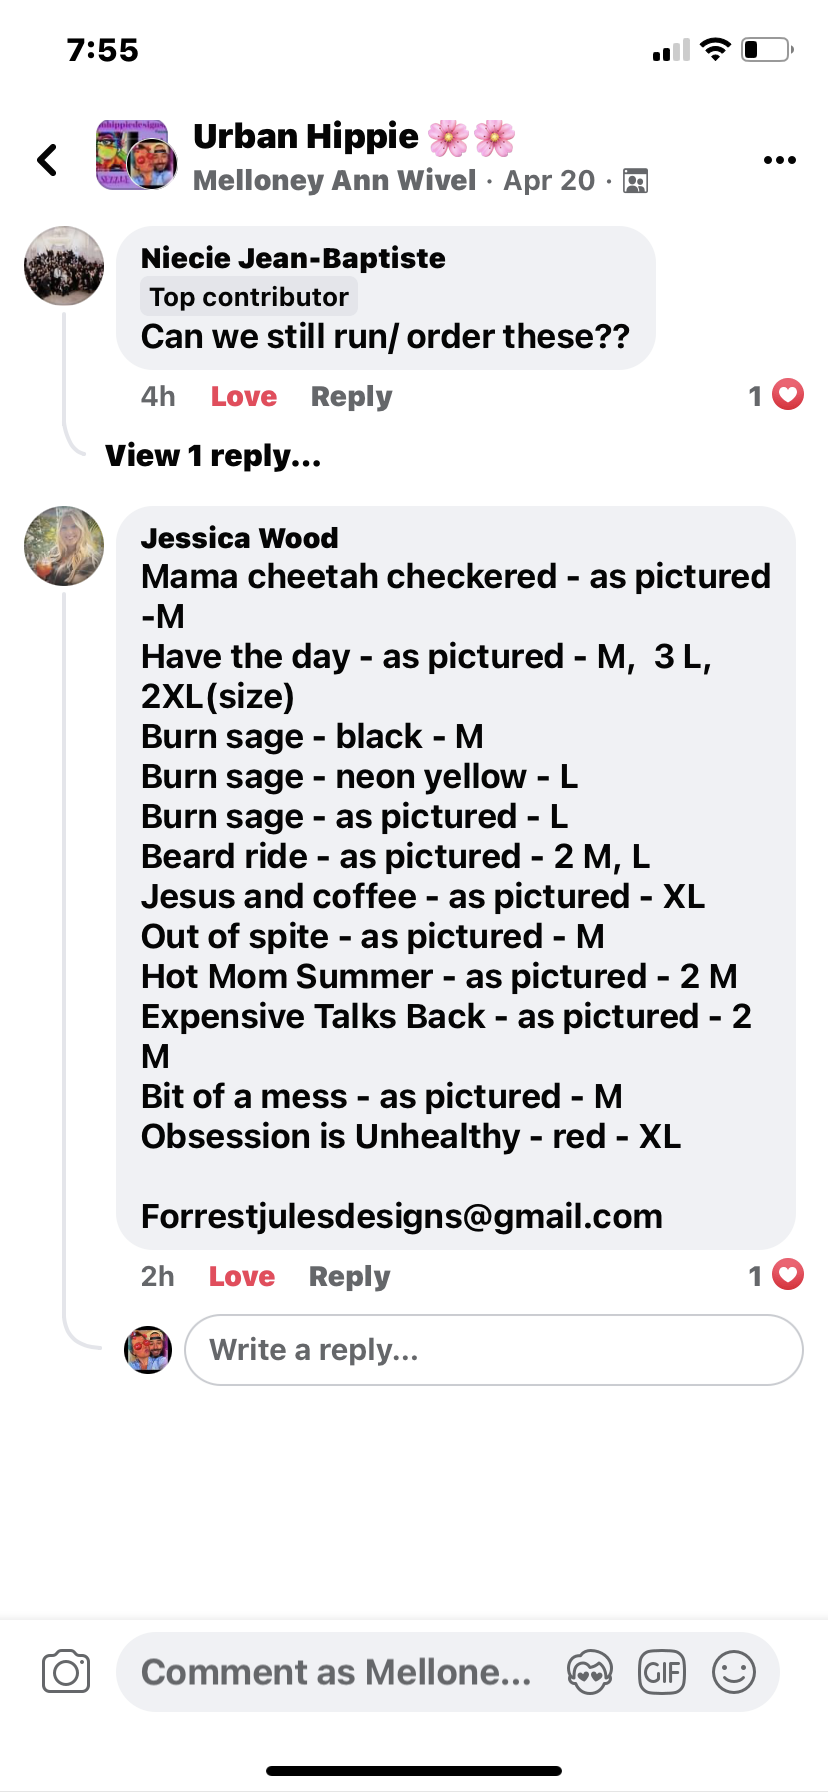 Jessica’s $10 tee order Mama cheetah checkered - as pictured -M
Have the day - as pictured - M,  3 L, 2XL(size)
Burn sage - black - M 
Burn sage - neon yellow - L
Burn sage - as pictured - L
Beard ride - as pictured - 2 M, L 
Jesus and coffee - as picture